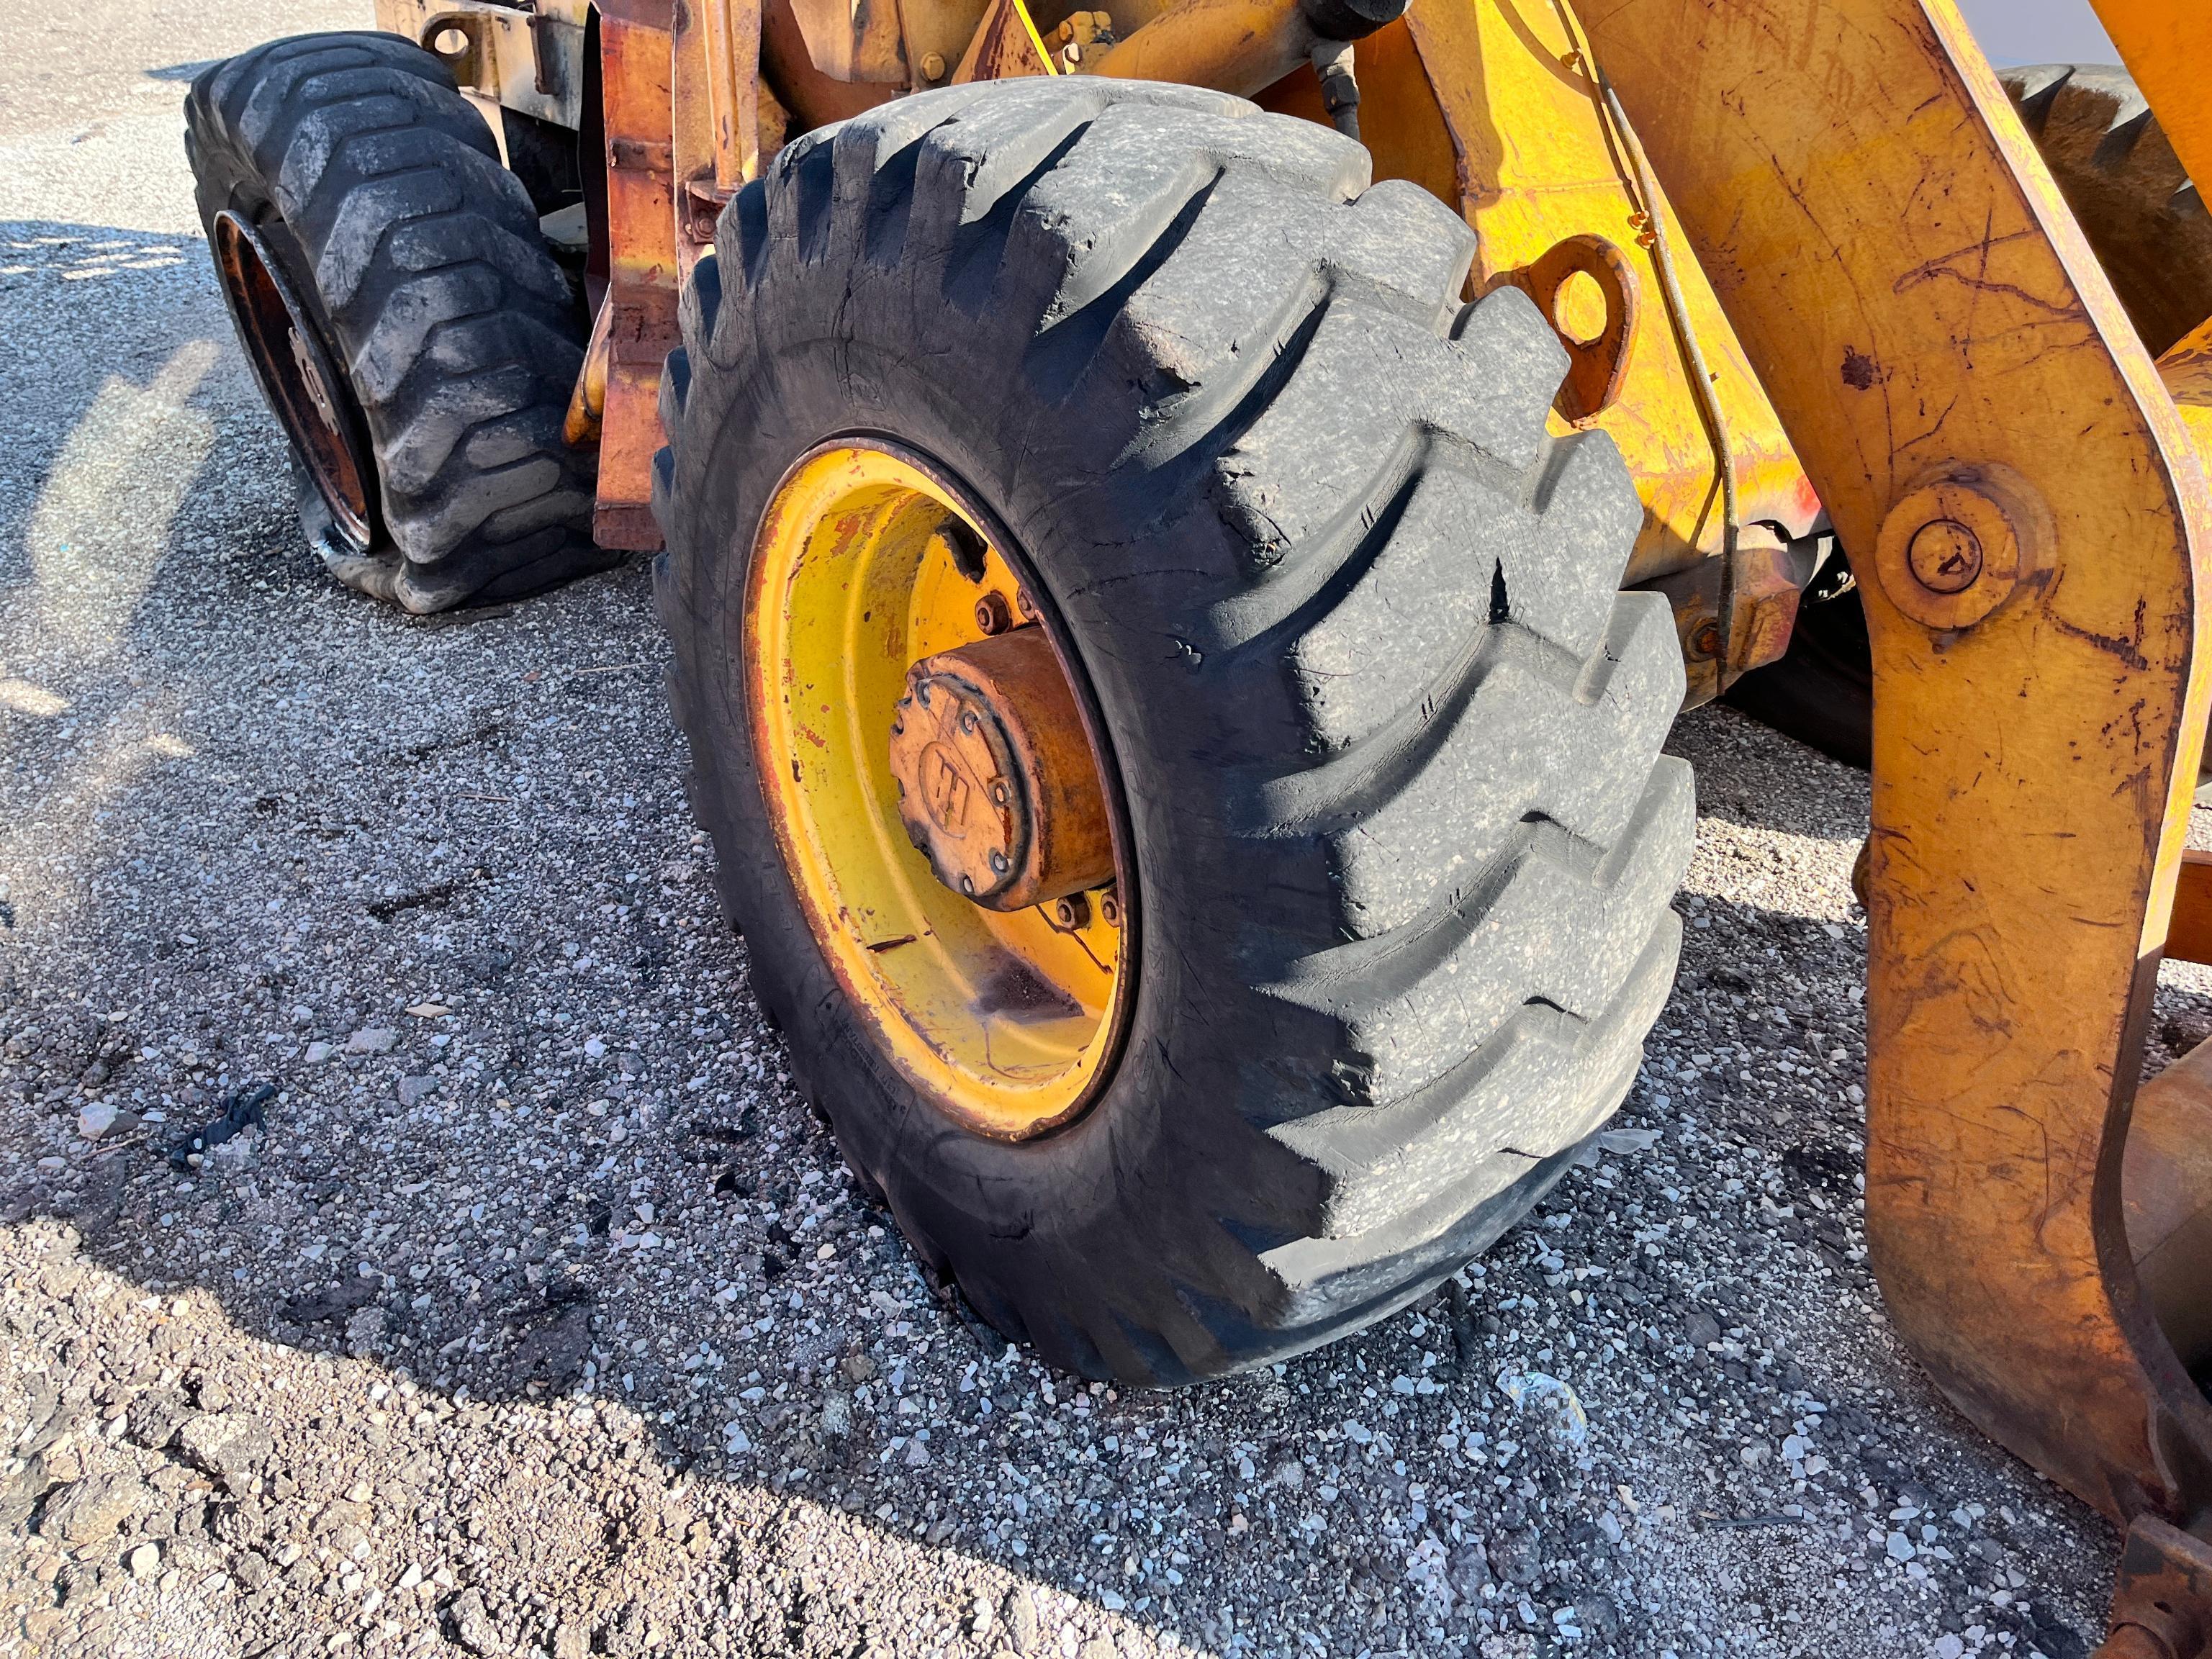 IH PAYLOADER H60 RUBBER TIRED LOADER powered by diesel engine, equipped with ECAB, 72in. Forks,